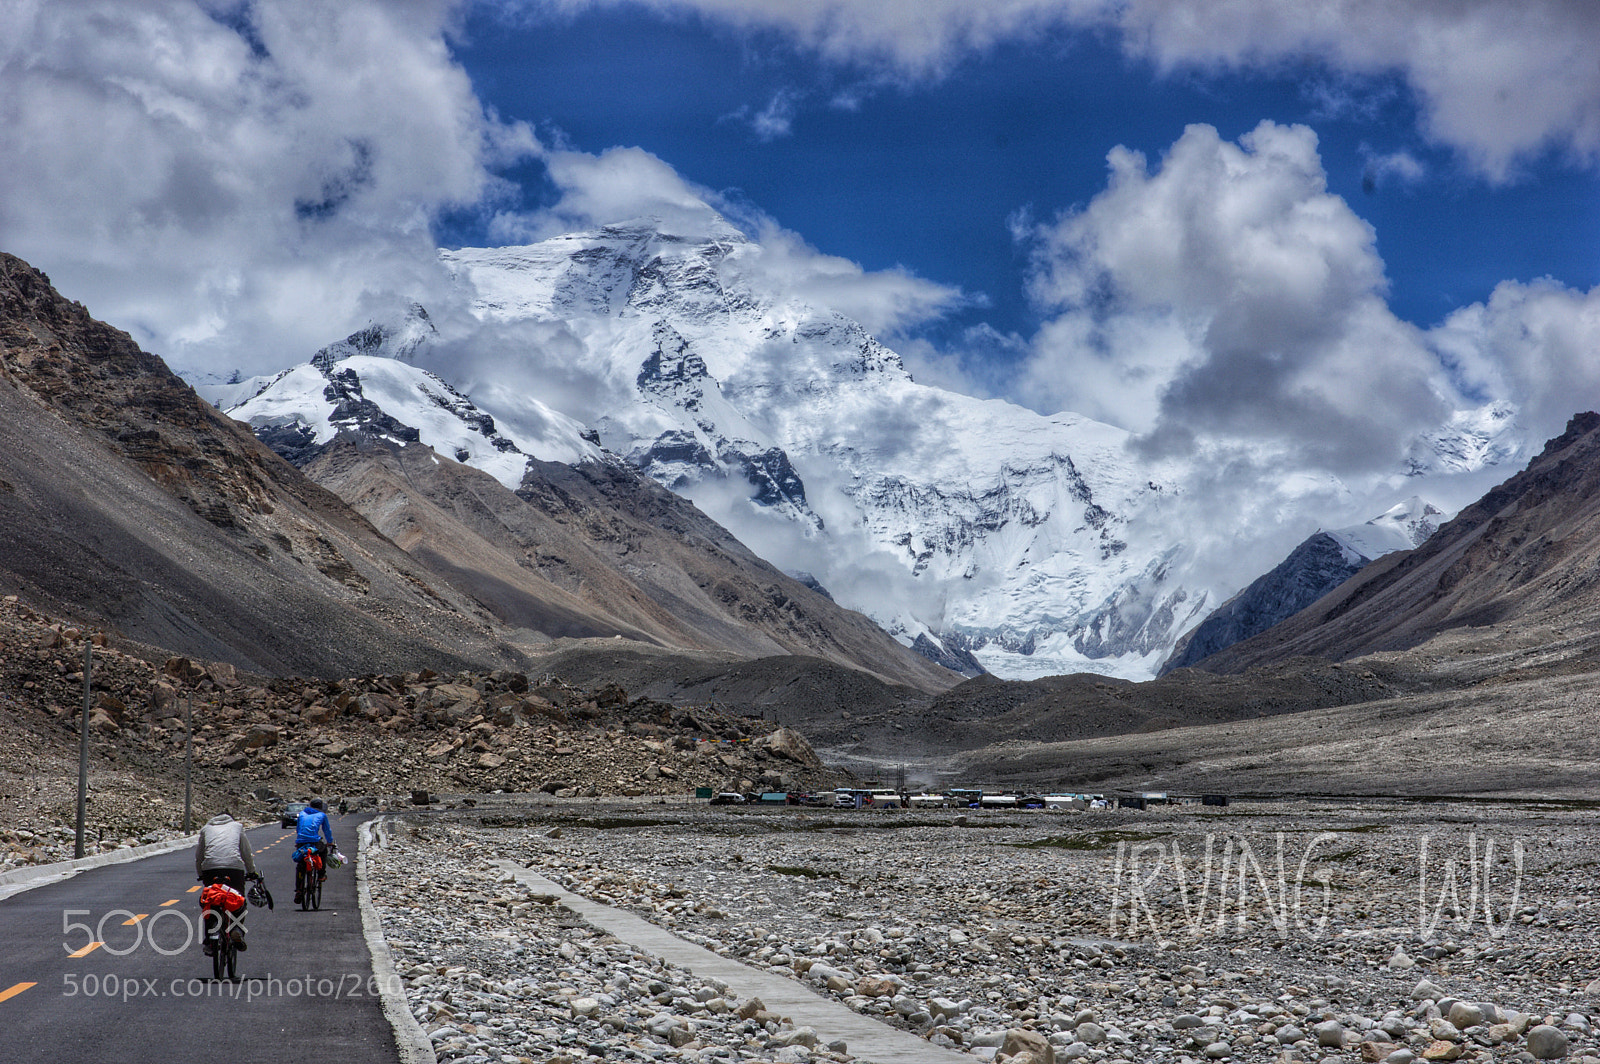 Pentax K-3 II sample photo. The journey to everest photography